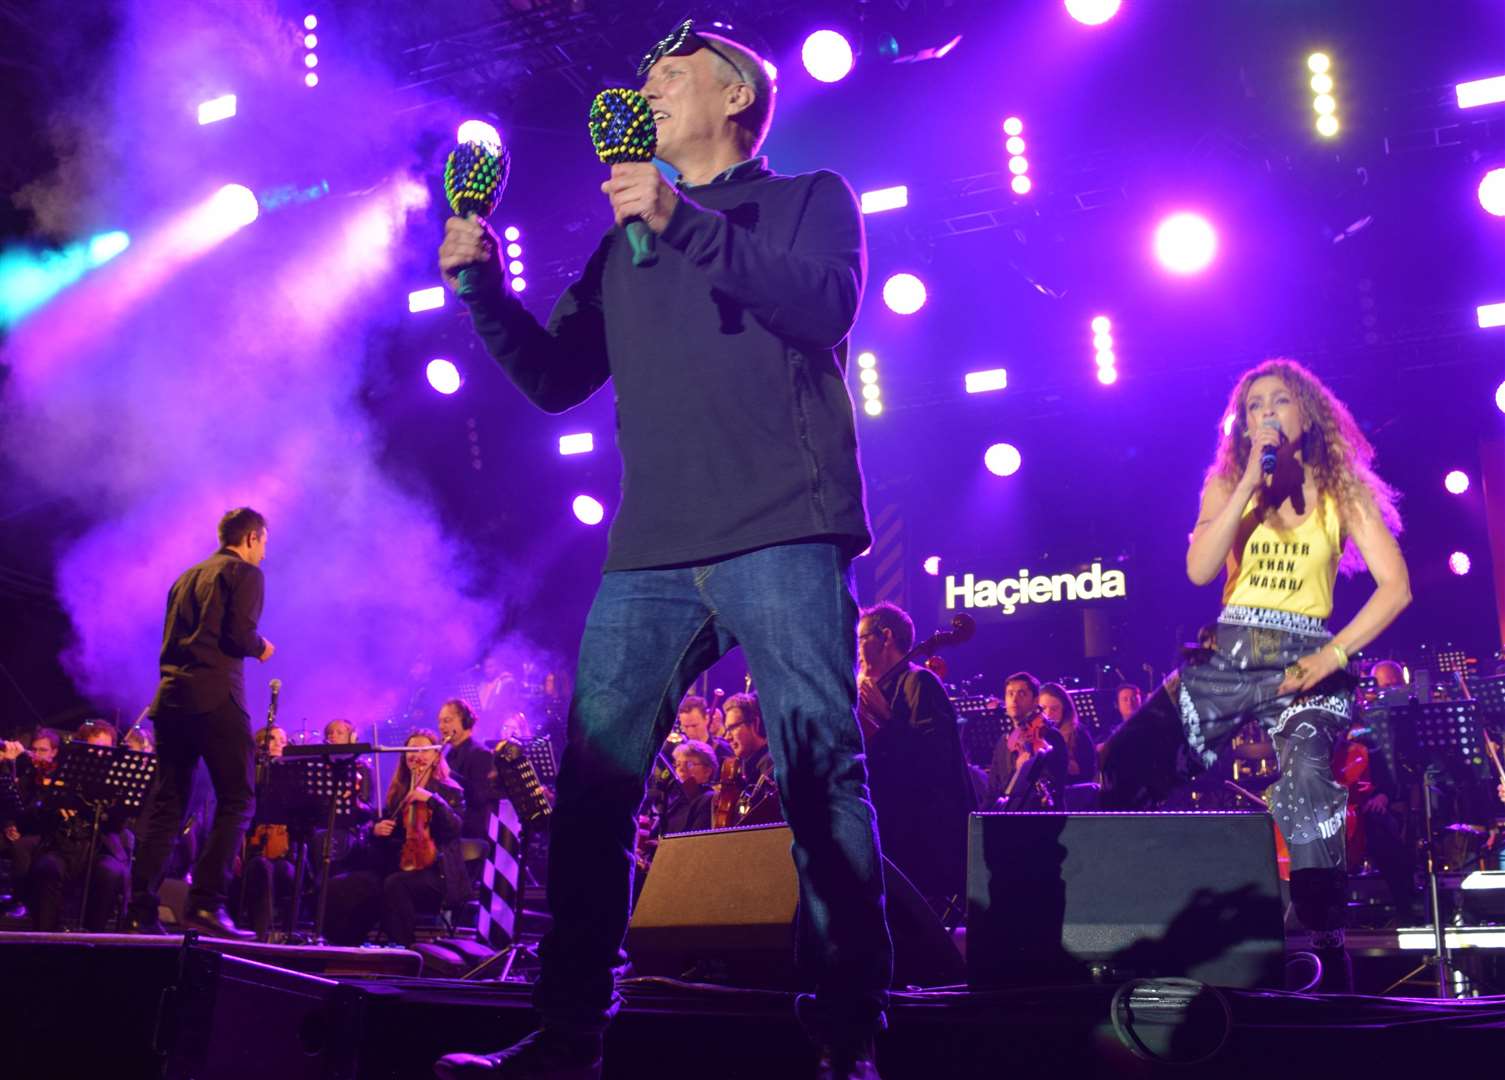 Bez on the maracas with Hacienda Classical at Forest Live in Bedgebury Pictrue: Emma Bramley